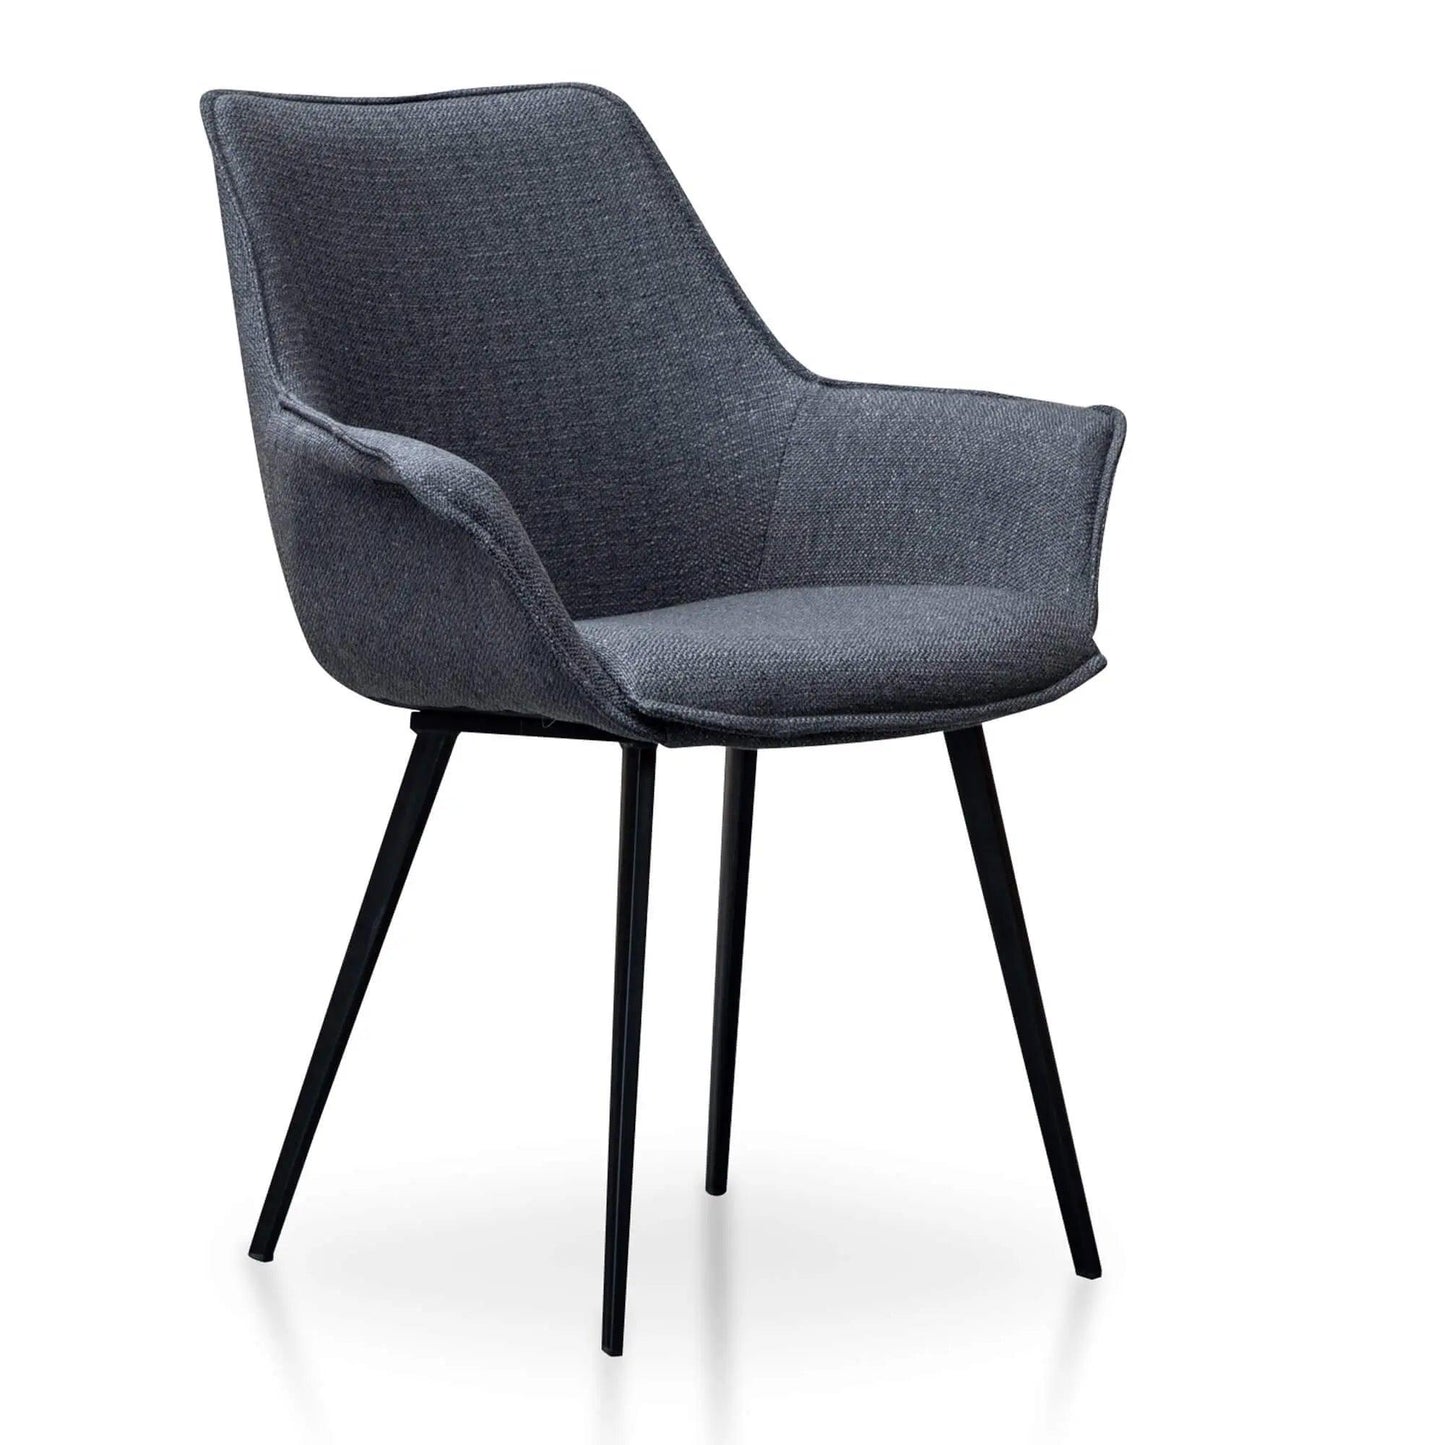 Calibre Dining Chair - Charcoal Grey (Set of 2) DC2633-SEx2 - Dining ChairsDC2633-SEx2 2